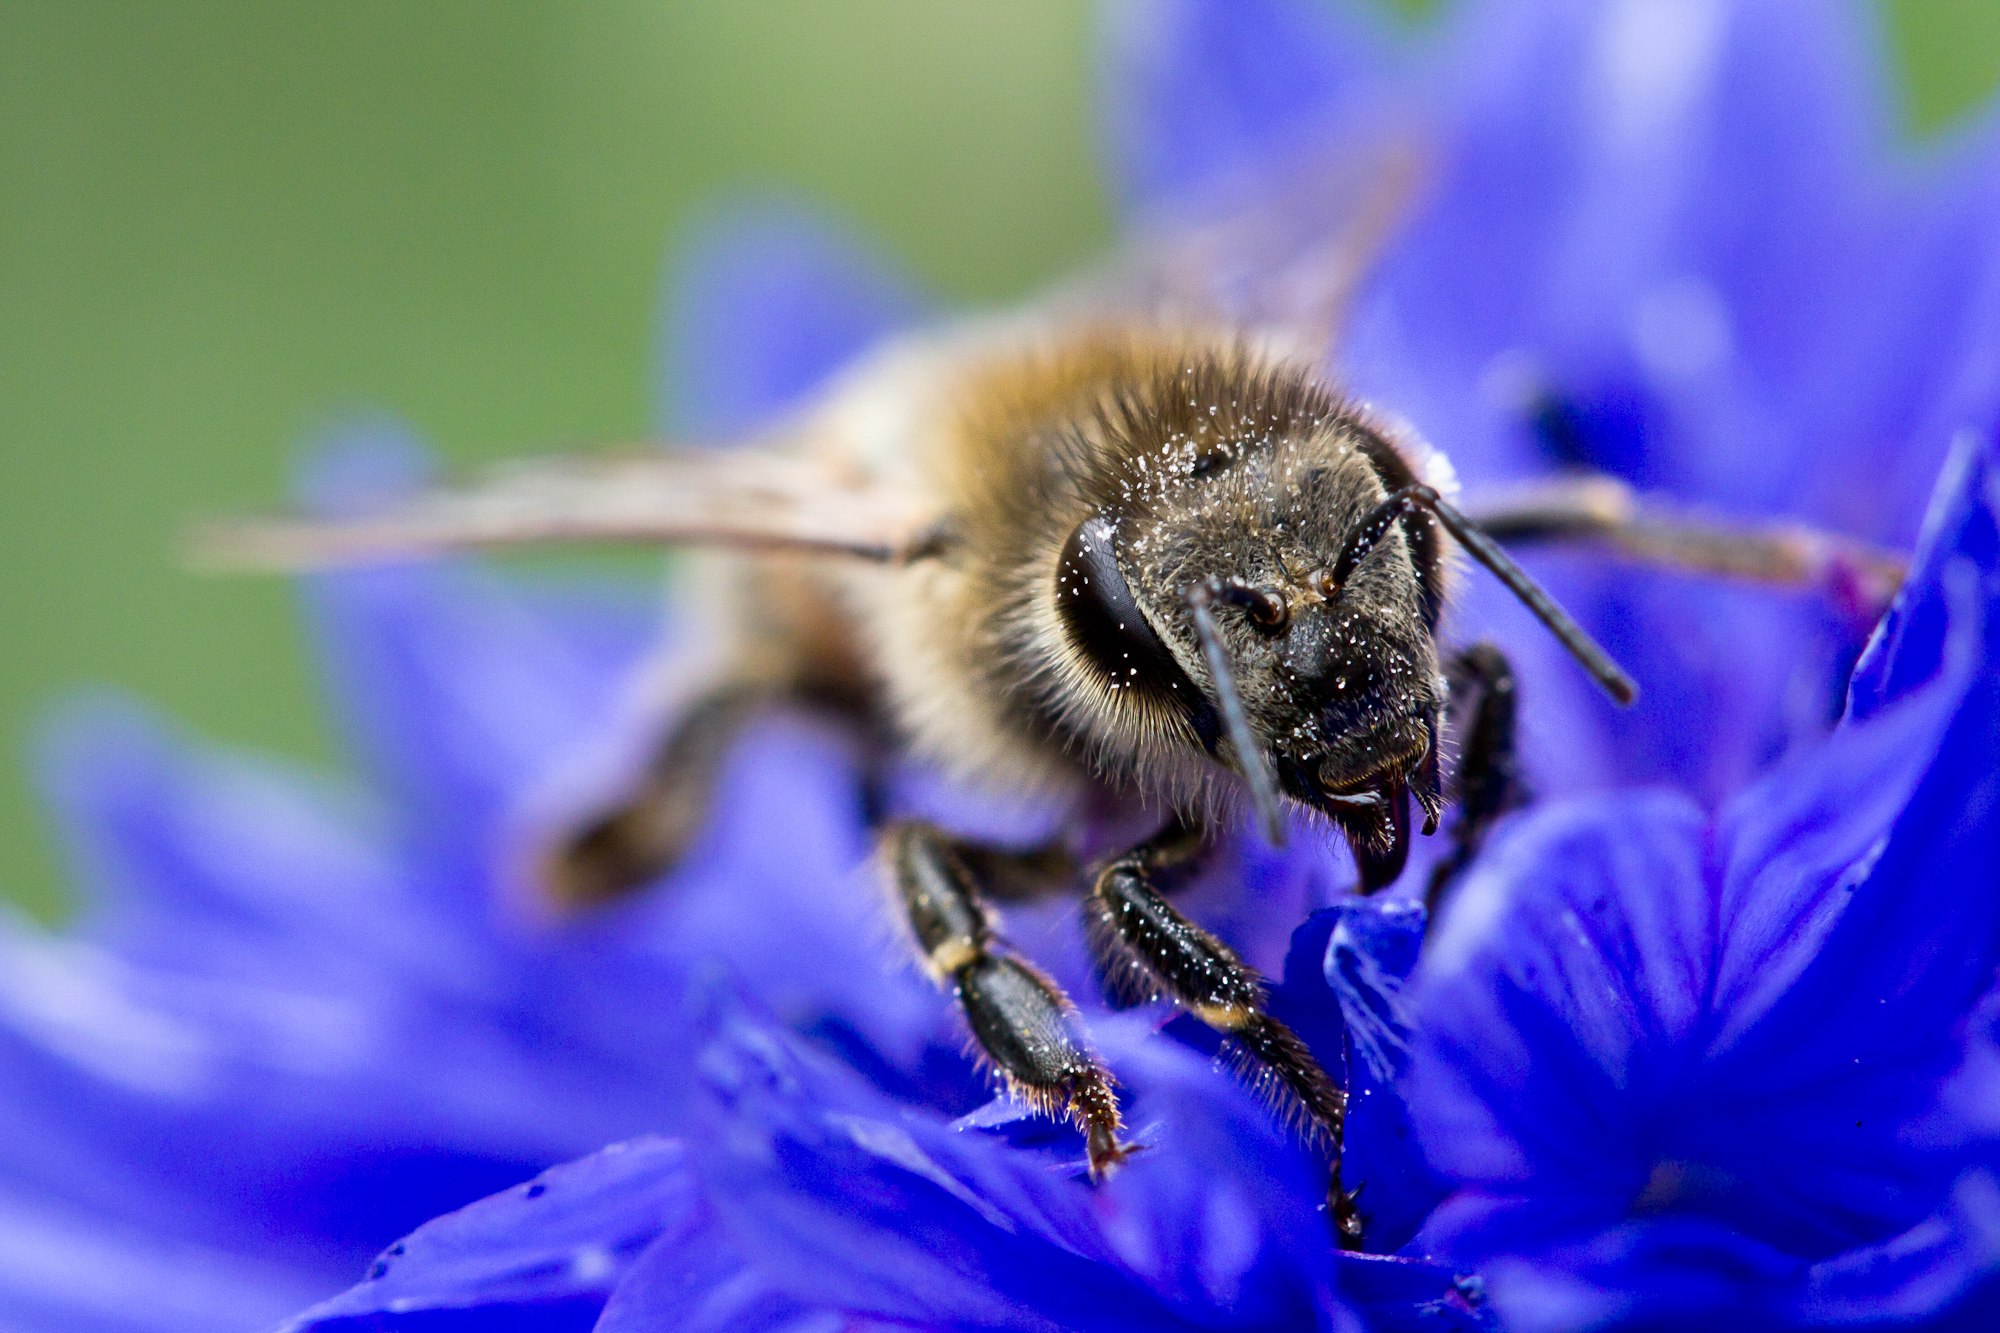 In Search of Spiritual Guidance? Look to the Bees